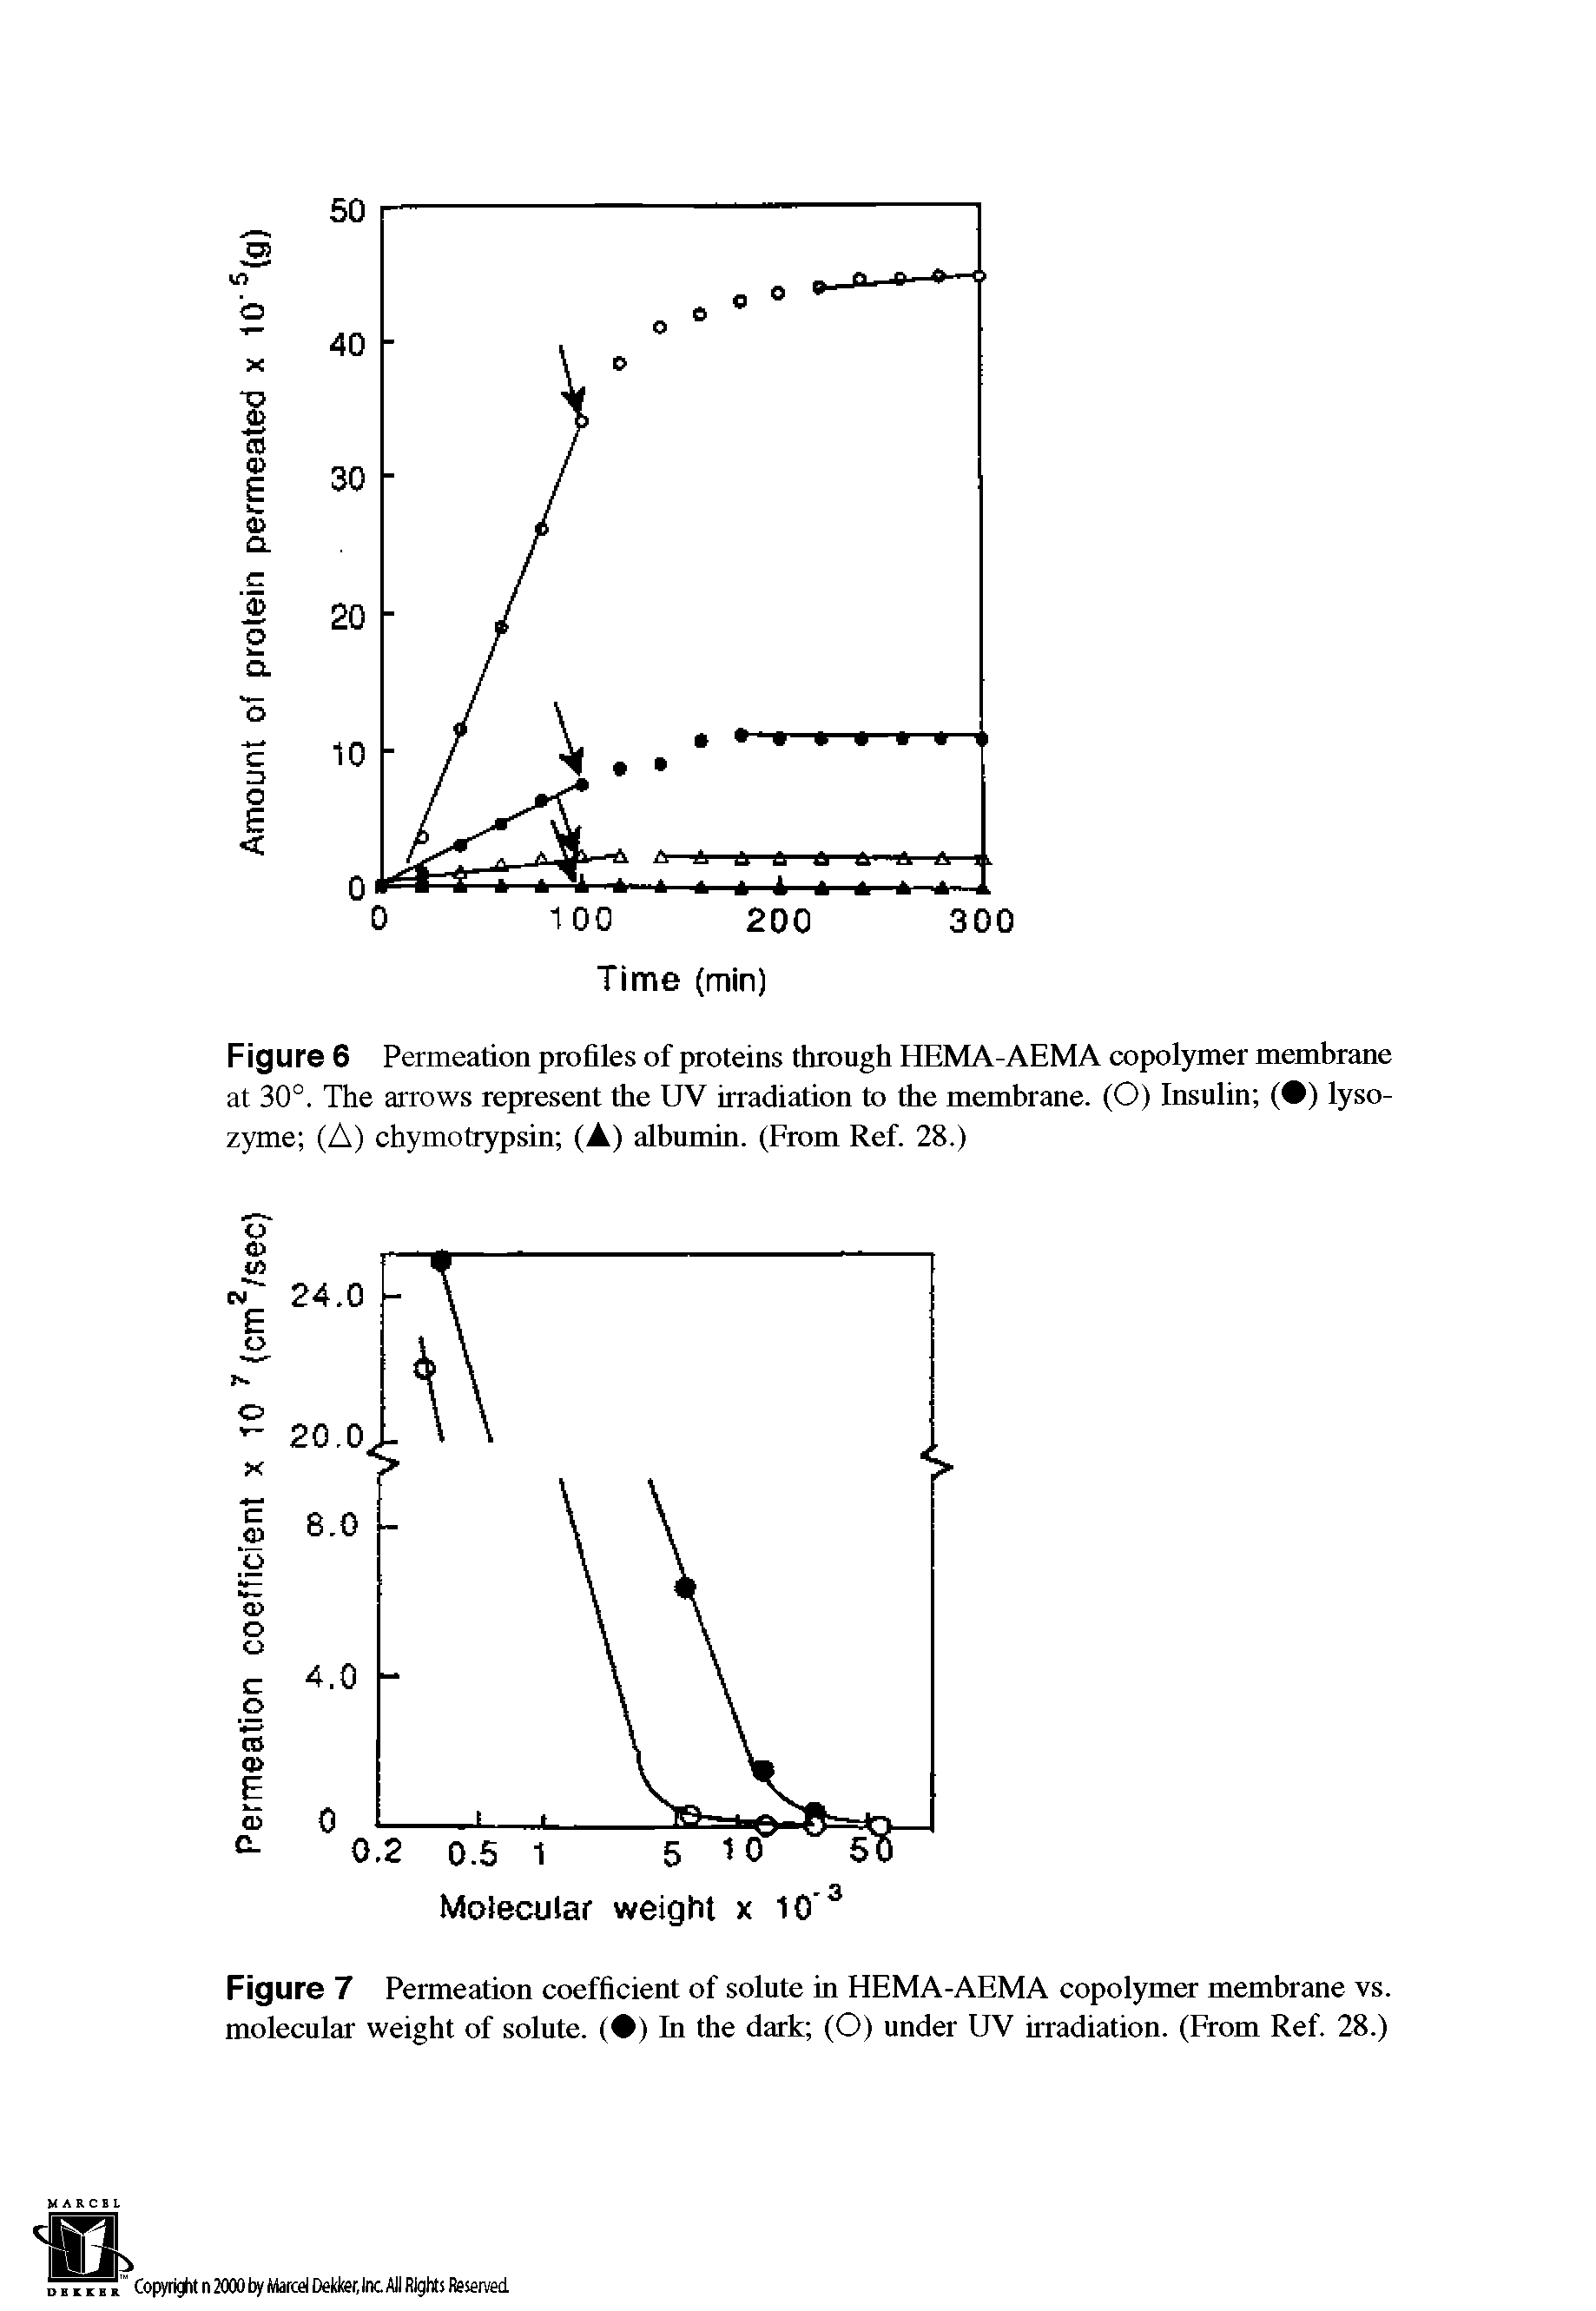 Figure 7 Permeation coefficient of solute in HEMA-AEMA copolymer membrane vs. molecular weight of solute. ( ) In the dark (O) under UV irradiation. (From Ref. 28.)...